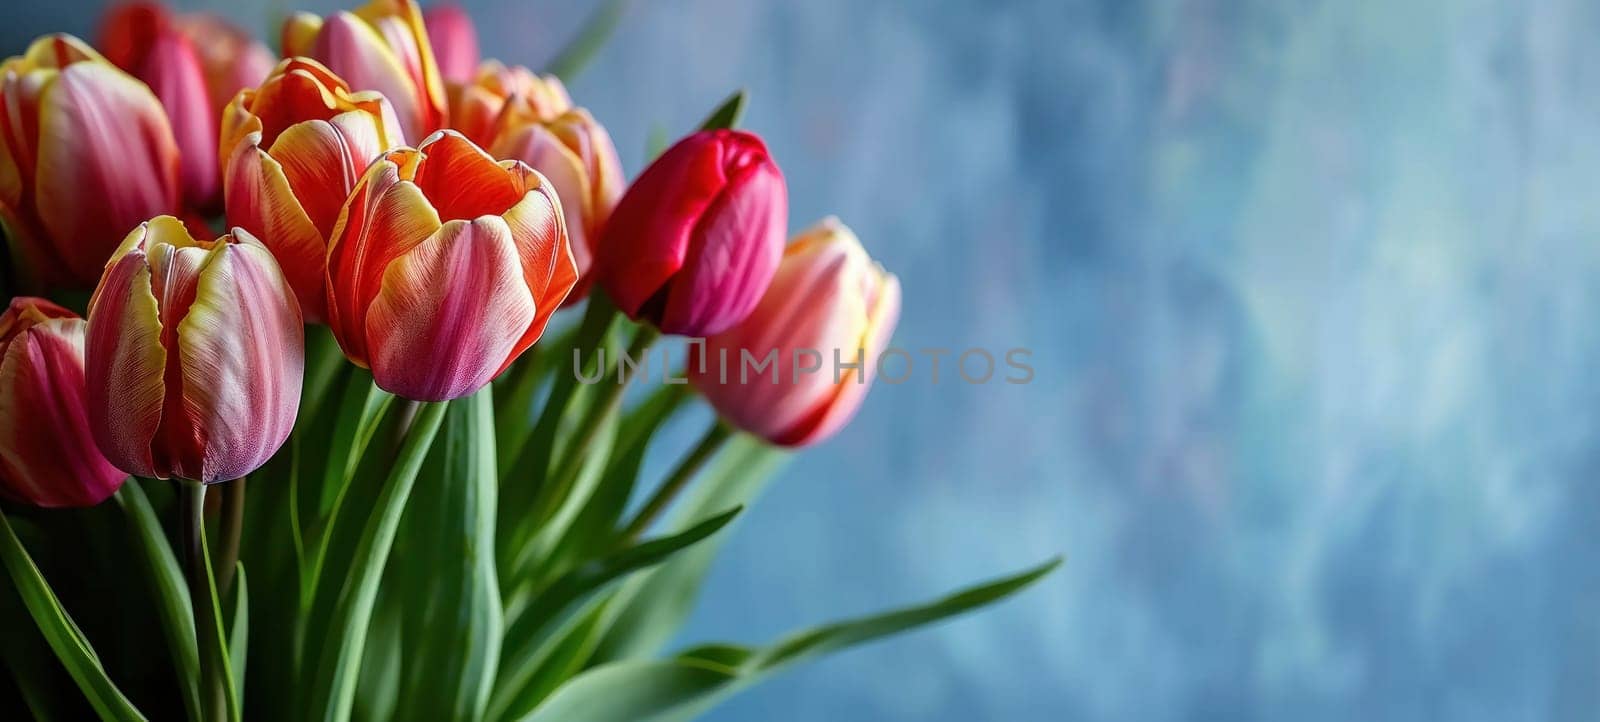 Beautiful bouquet of multicolored tulips against a soft blue textured backdrop with copy space.